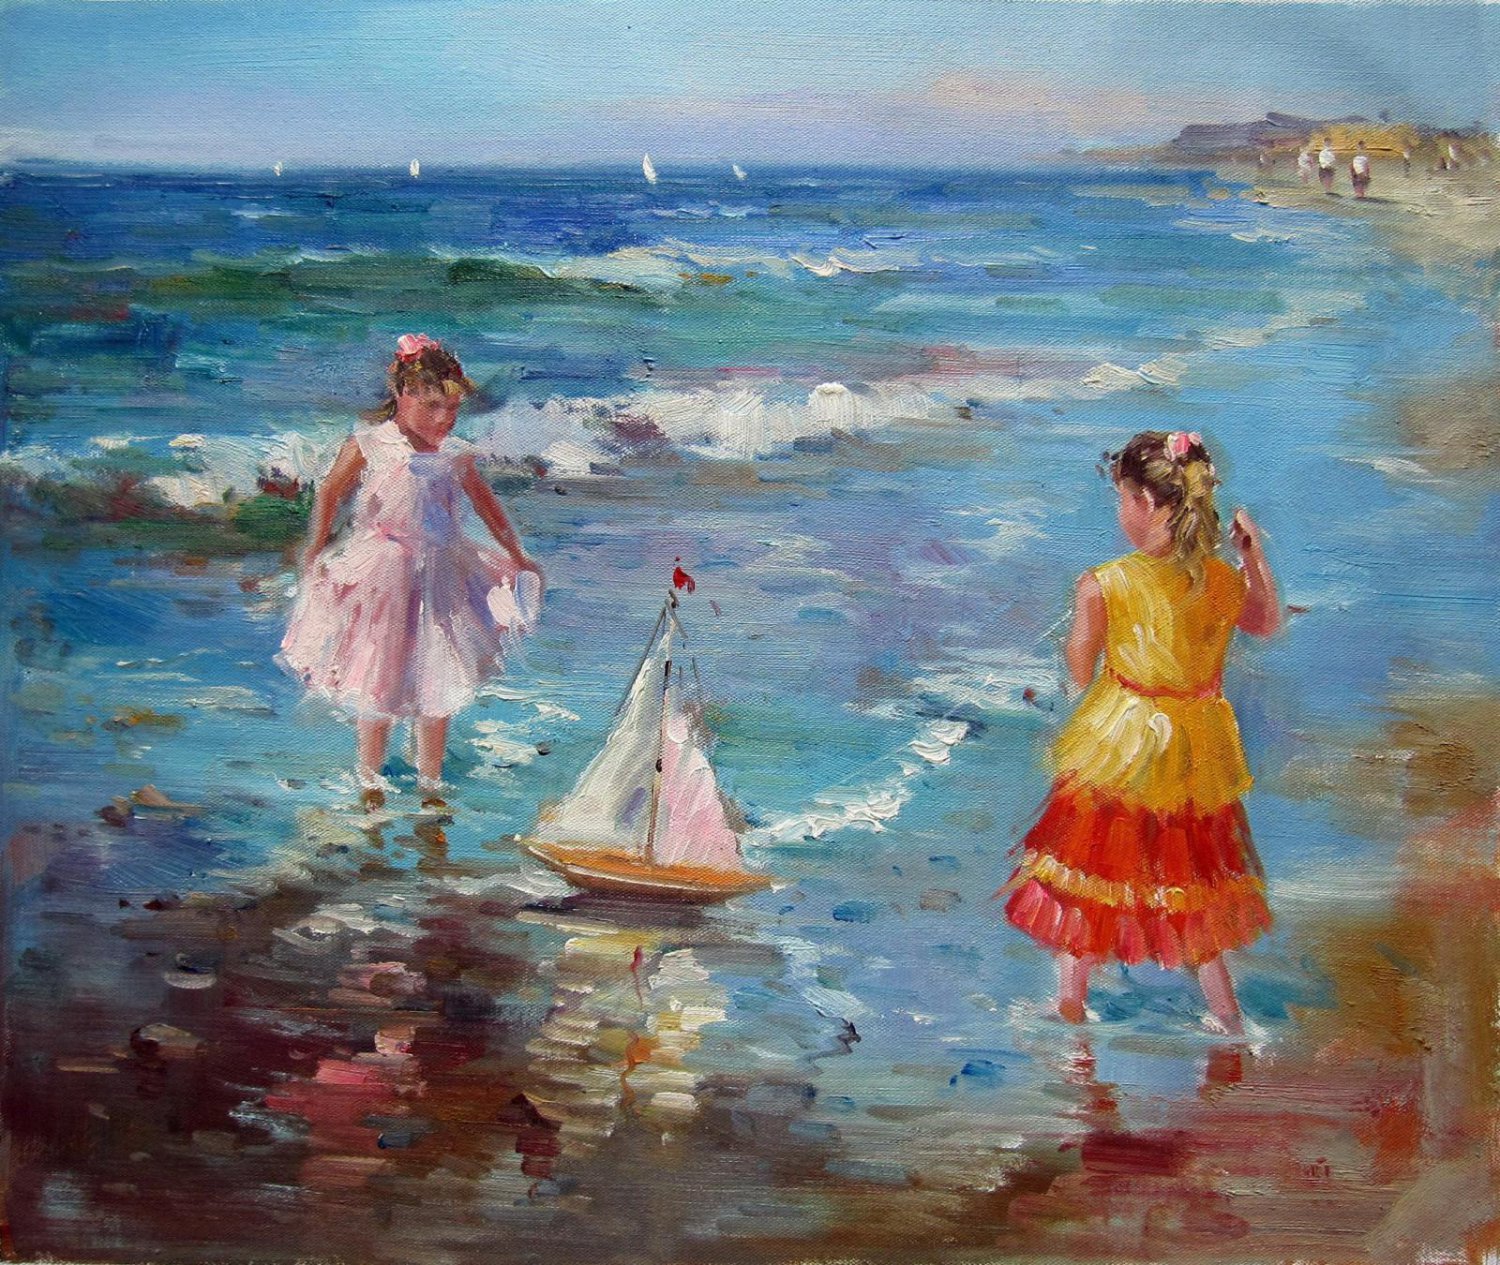 play at the beach 20x24 in. stretched Oil Painting Canvas Art Wall Decor modern238